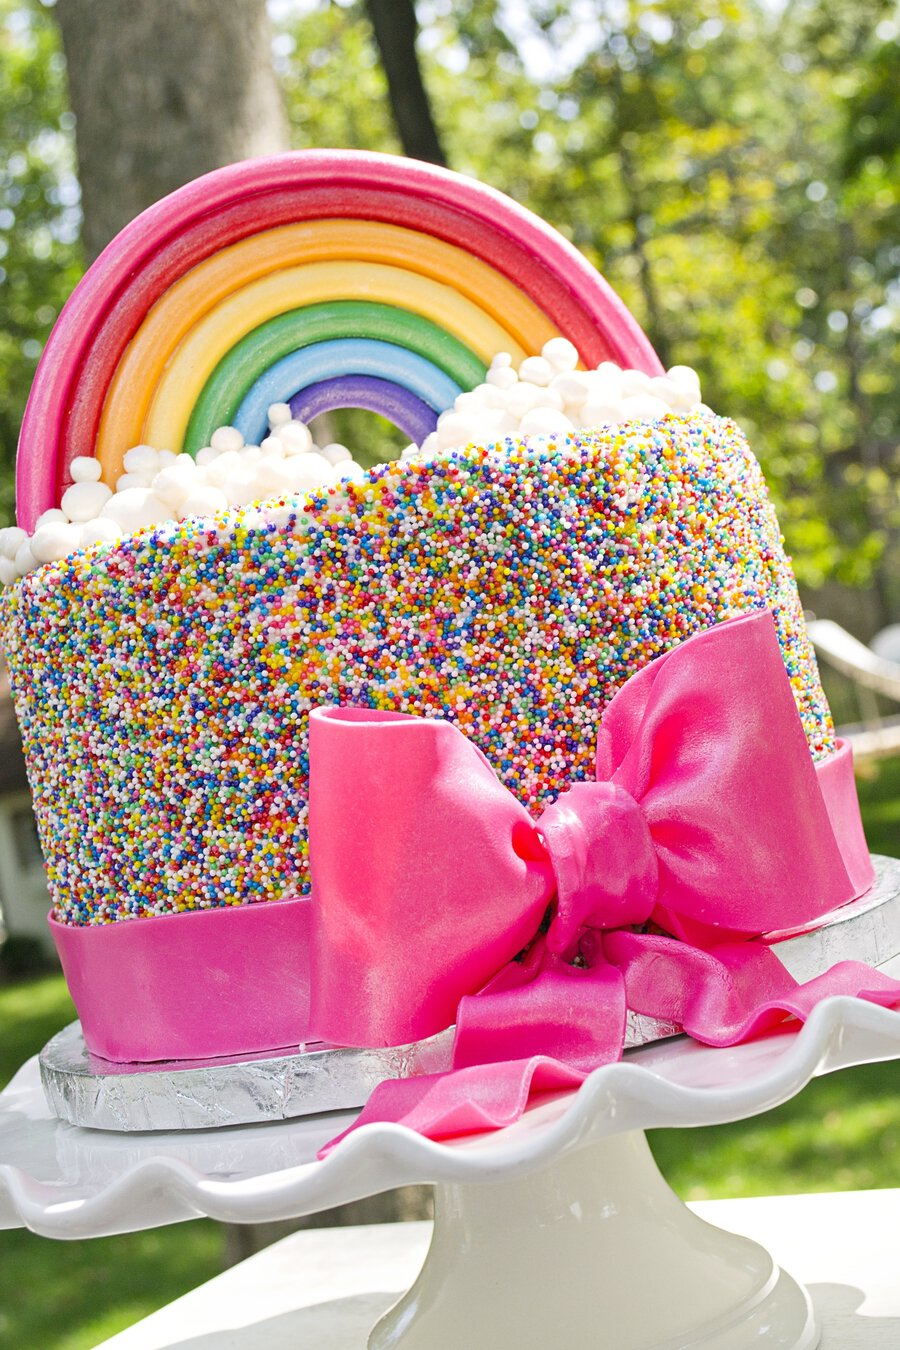 🎂🌈 Brighten up your birthday celebration with a stunning rainbow cake! 🌟 From classic layered cakes to surprise inside creations, our article is packed with colorful ideas to make your party unforgettable. Check out this vibrant rainbow birthday cake inspiration and get ready to spread some joy! 🎉🍰✨